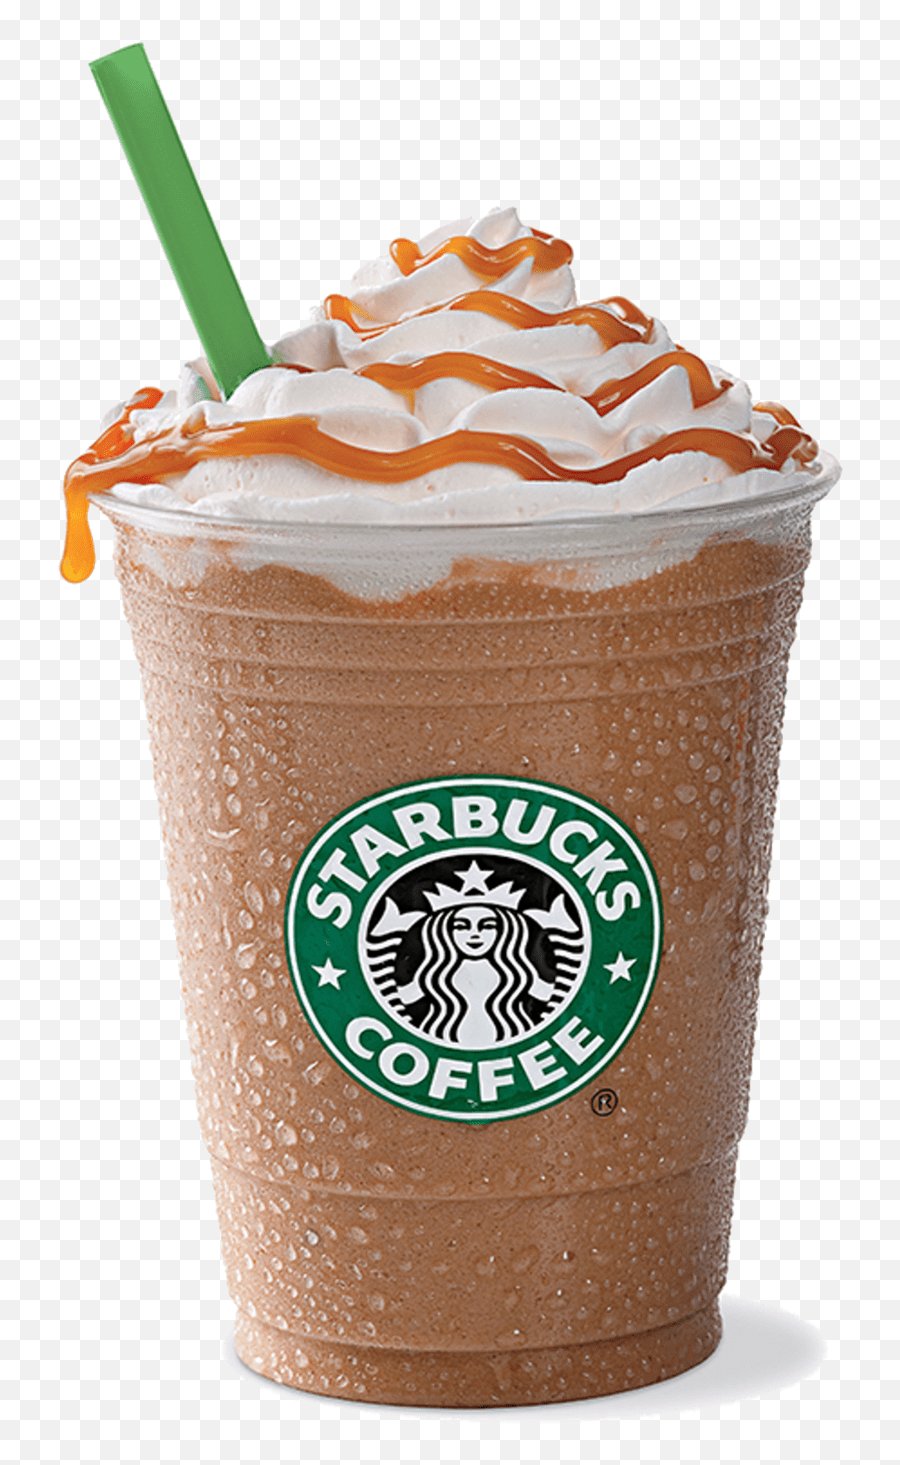 Download Starbucks Caramel Frappuccino - Starbucks Coffee Png Transparent,Frappuccino Png